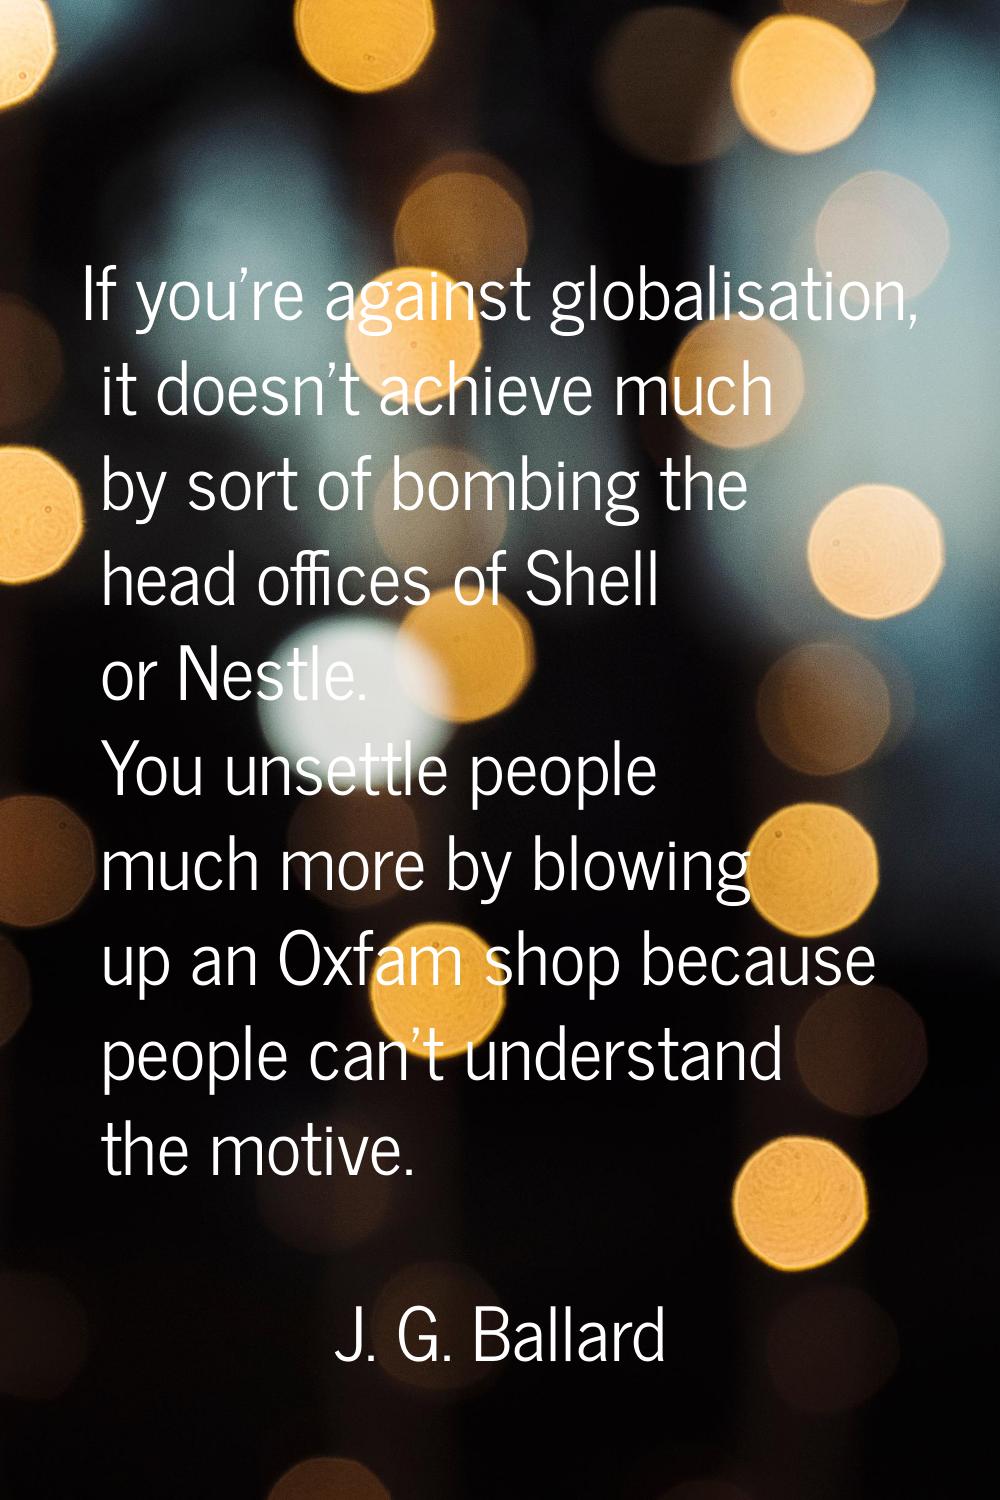 If you're against globalisation, it doesn't achieve much by sort of bombing the head offices of She